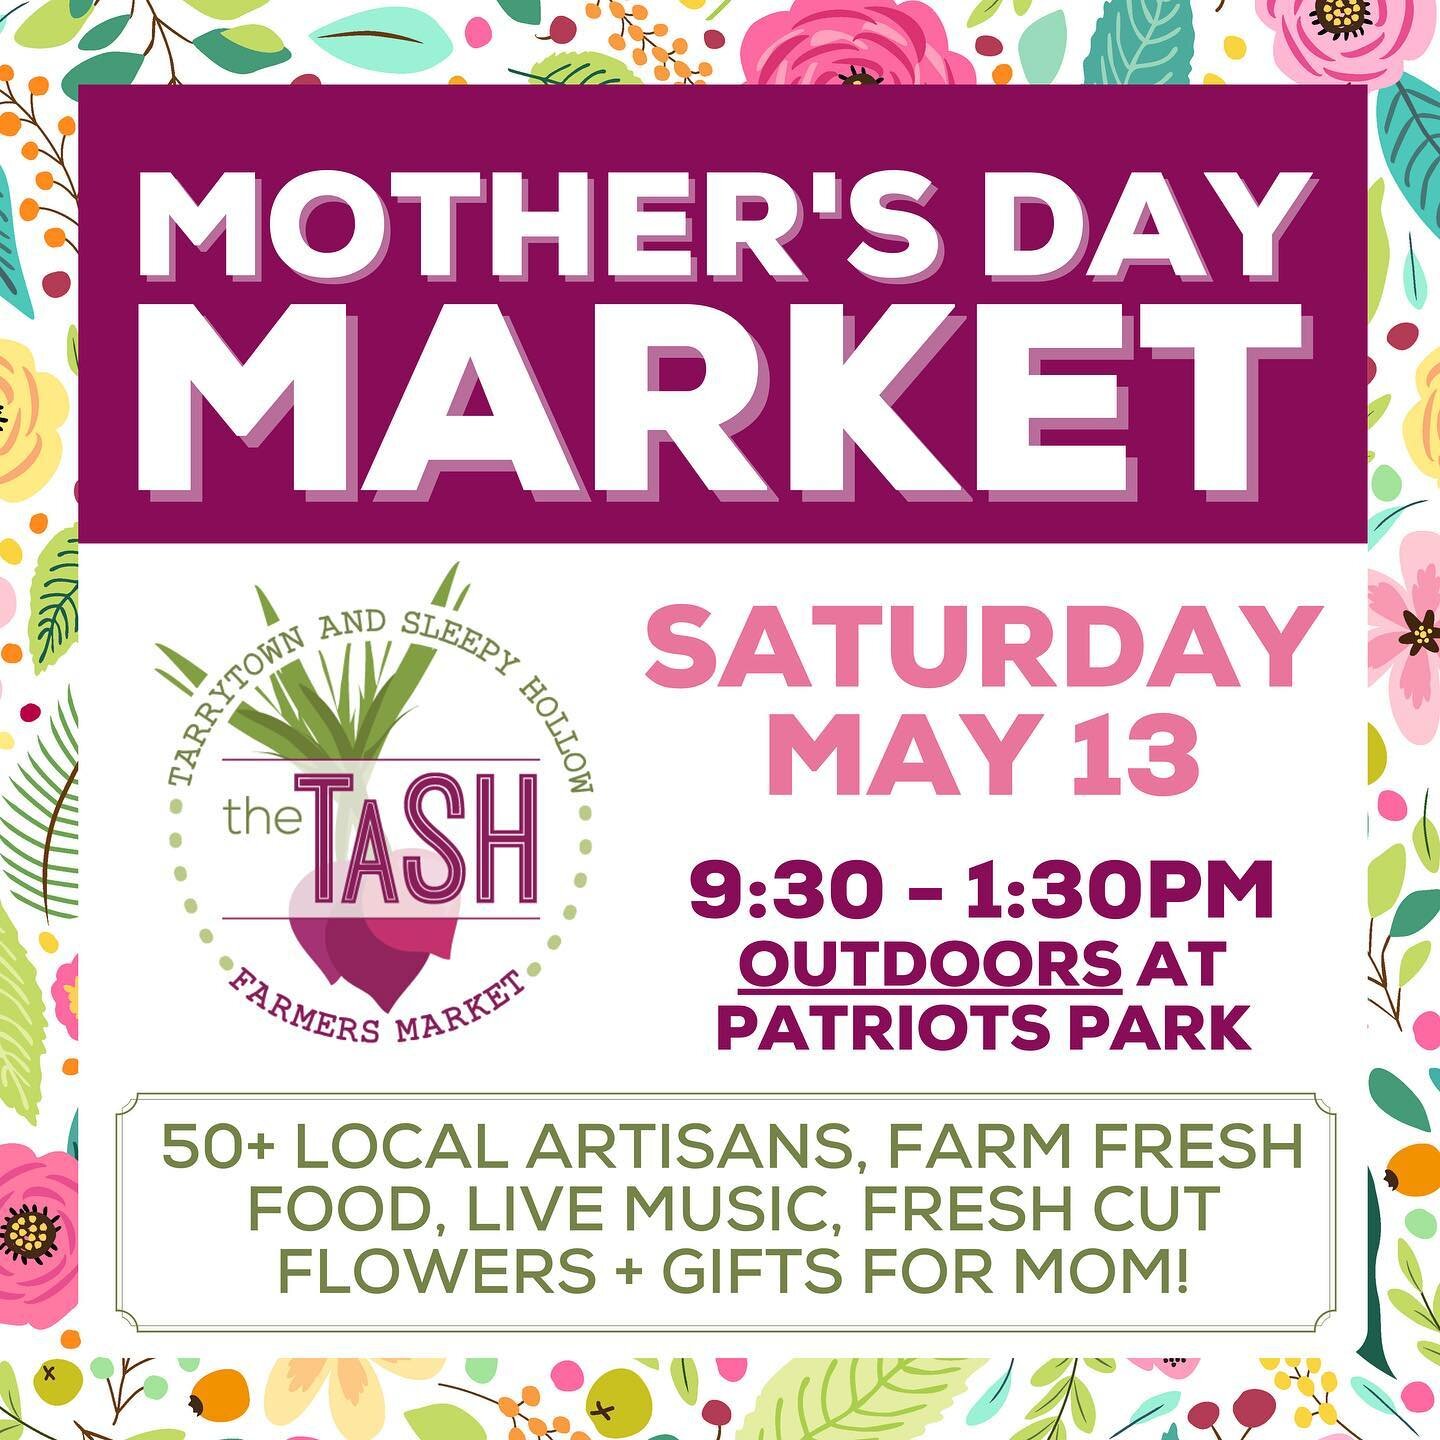 🌷SAVE THE DATE 🌷
We only have one winter market remaining (April 22) before we skip back outside to Patriots Park for our annual Mother&rsquo;s Day market. We have a lot of exciting things planned that we&rsquo;ll be sharing later this month!